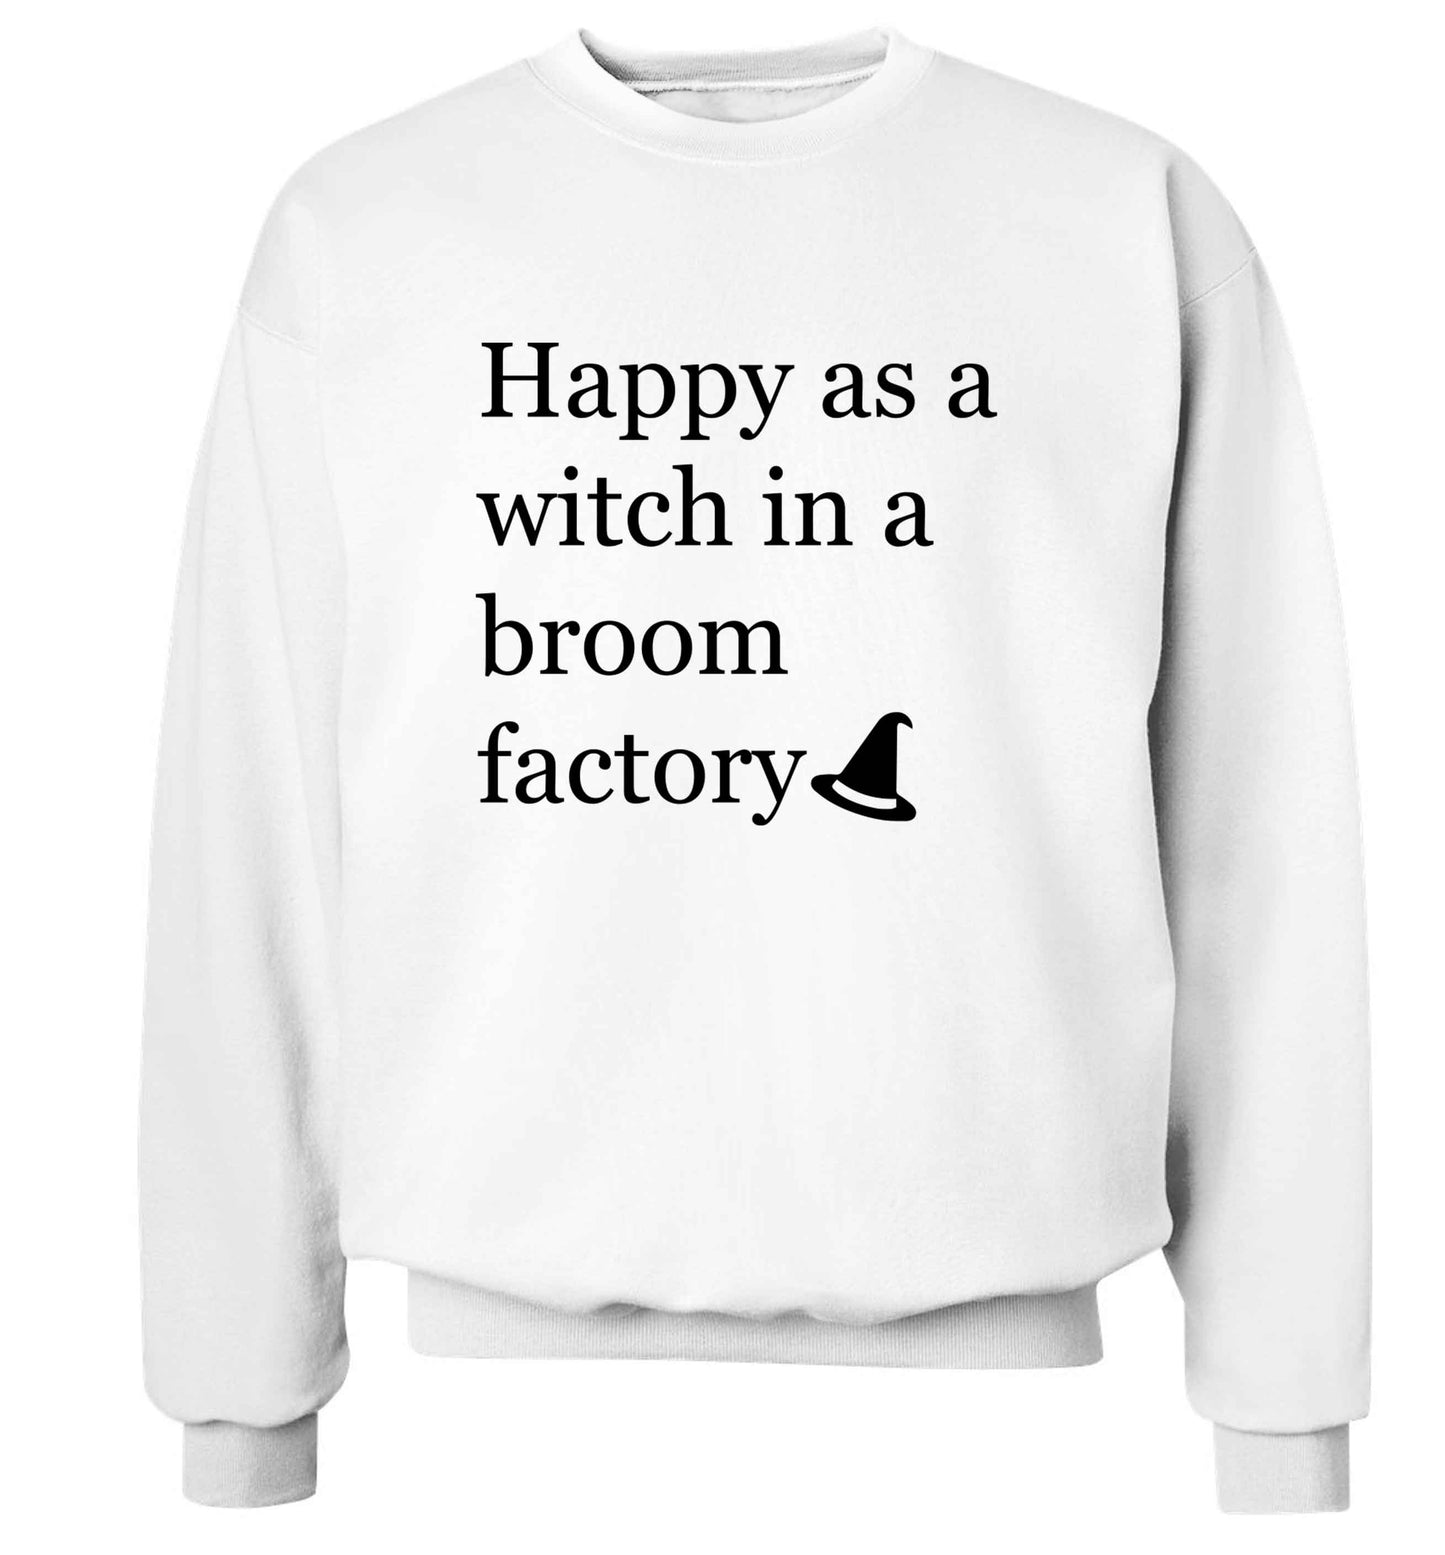 Happy as a witch in a broom factory adult's unisex white sweater 2XL